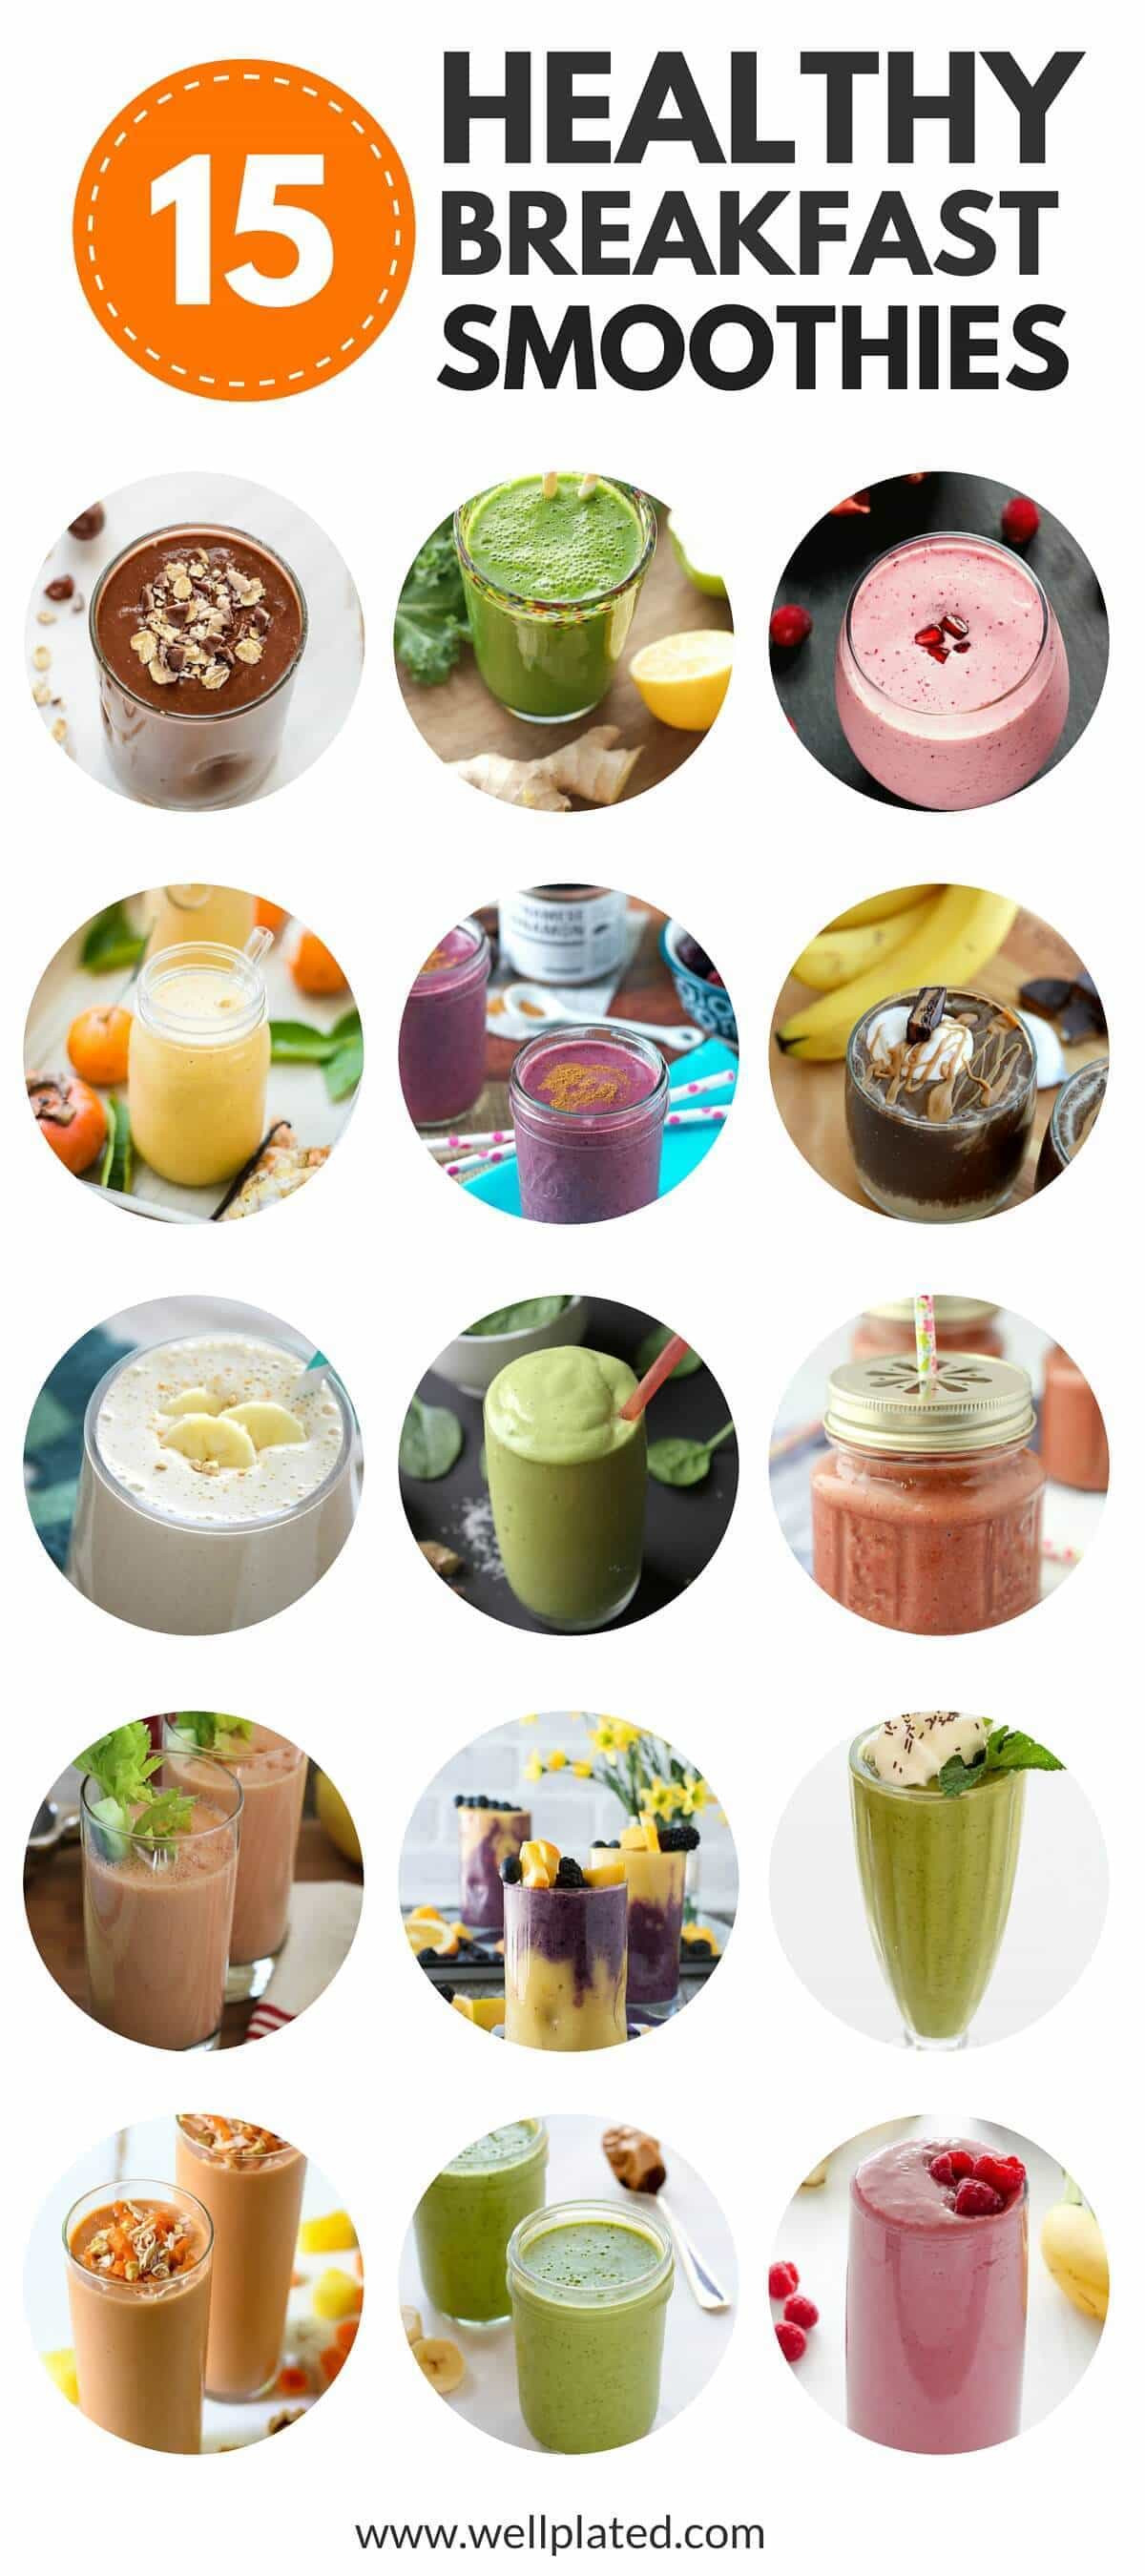 Good Healthy Smoothie Recipes
 The Best 15 Healthy Breakfast Smoothies